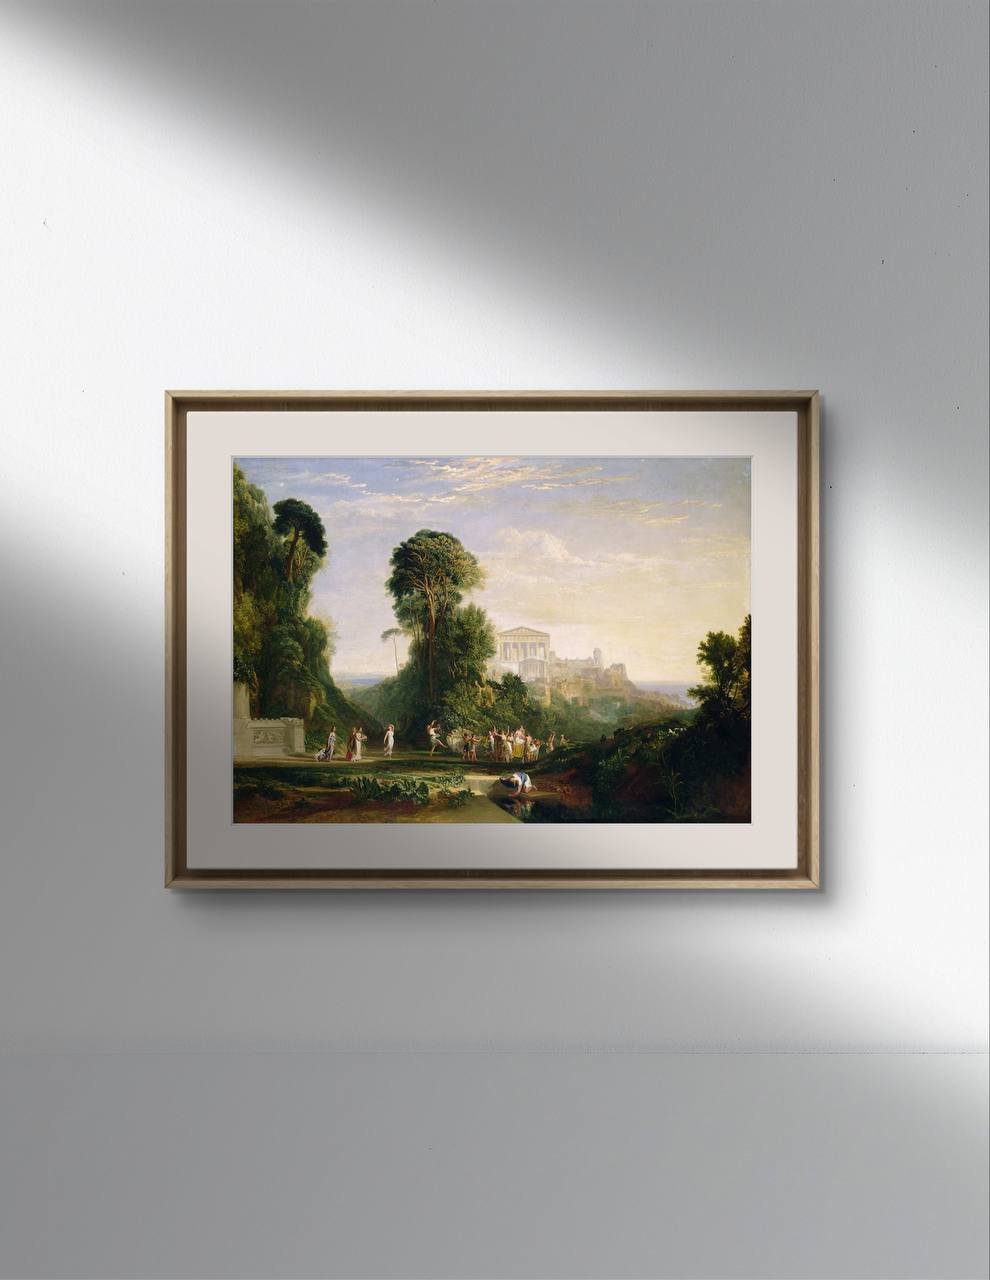 The second image presents another view of the same framed poster, this time hanging on a white wall. The frame is black with a minimalist design, giving a modern touch to the classical art reproduction. Natural light creates soft shadows on the wall, further highlighting the painting. The artwork shows a vibrant scene with classical figures in a green setting, with a majestic temple in the background.